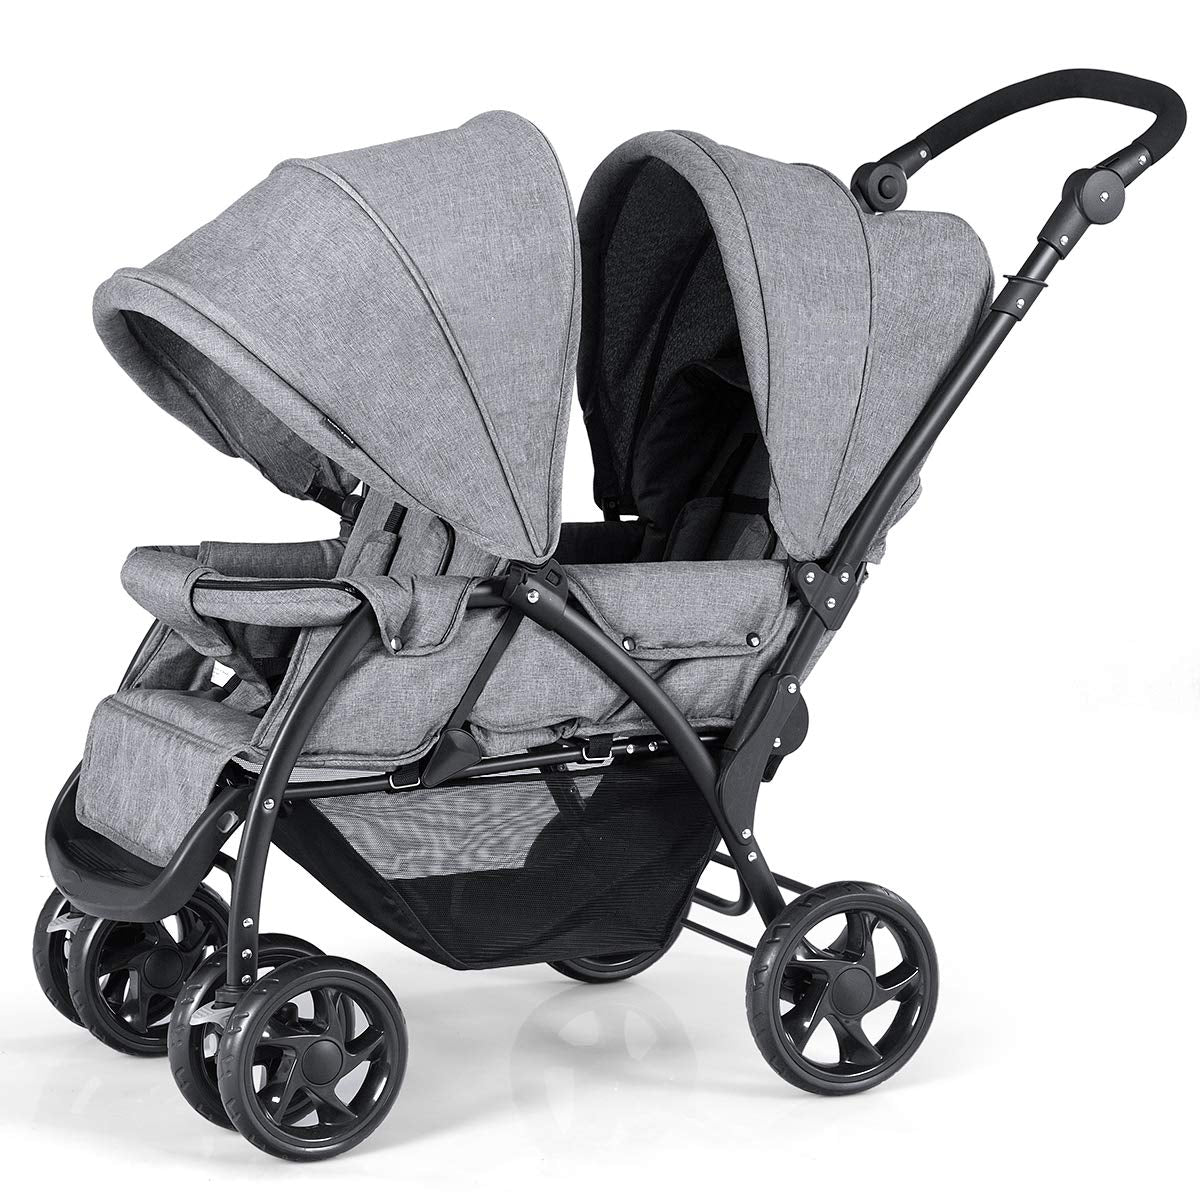 Folding Lightweight Front Back Seats Double Baby Stroller for Infants & Toddlers